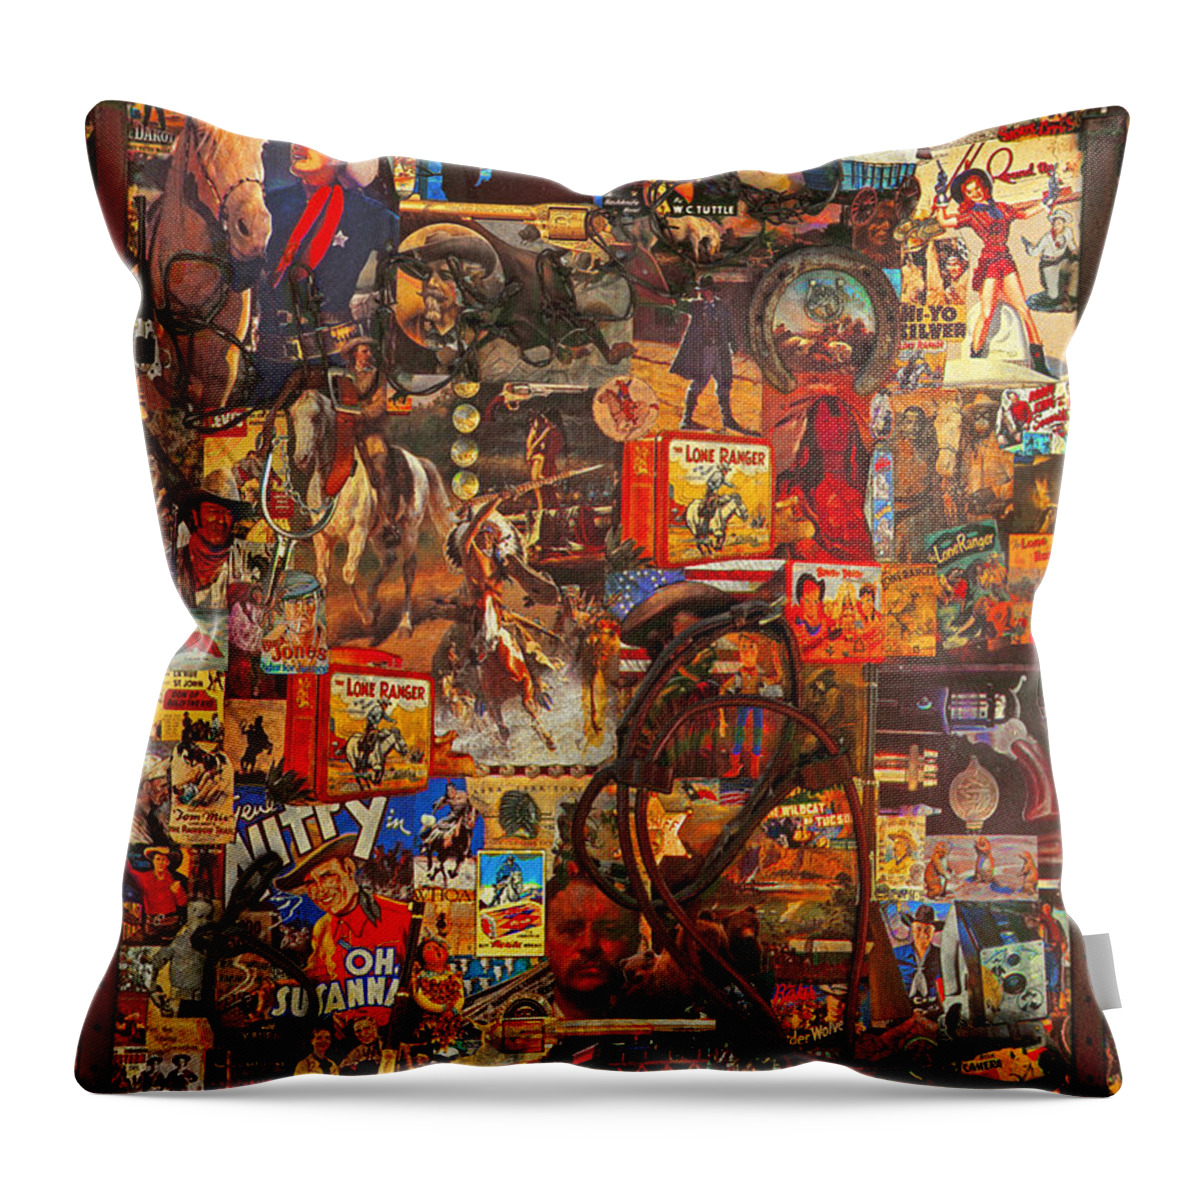 West Throw Pillow featuring the painting Wild West Poster by William Cain